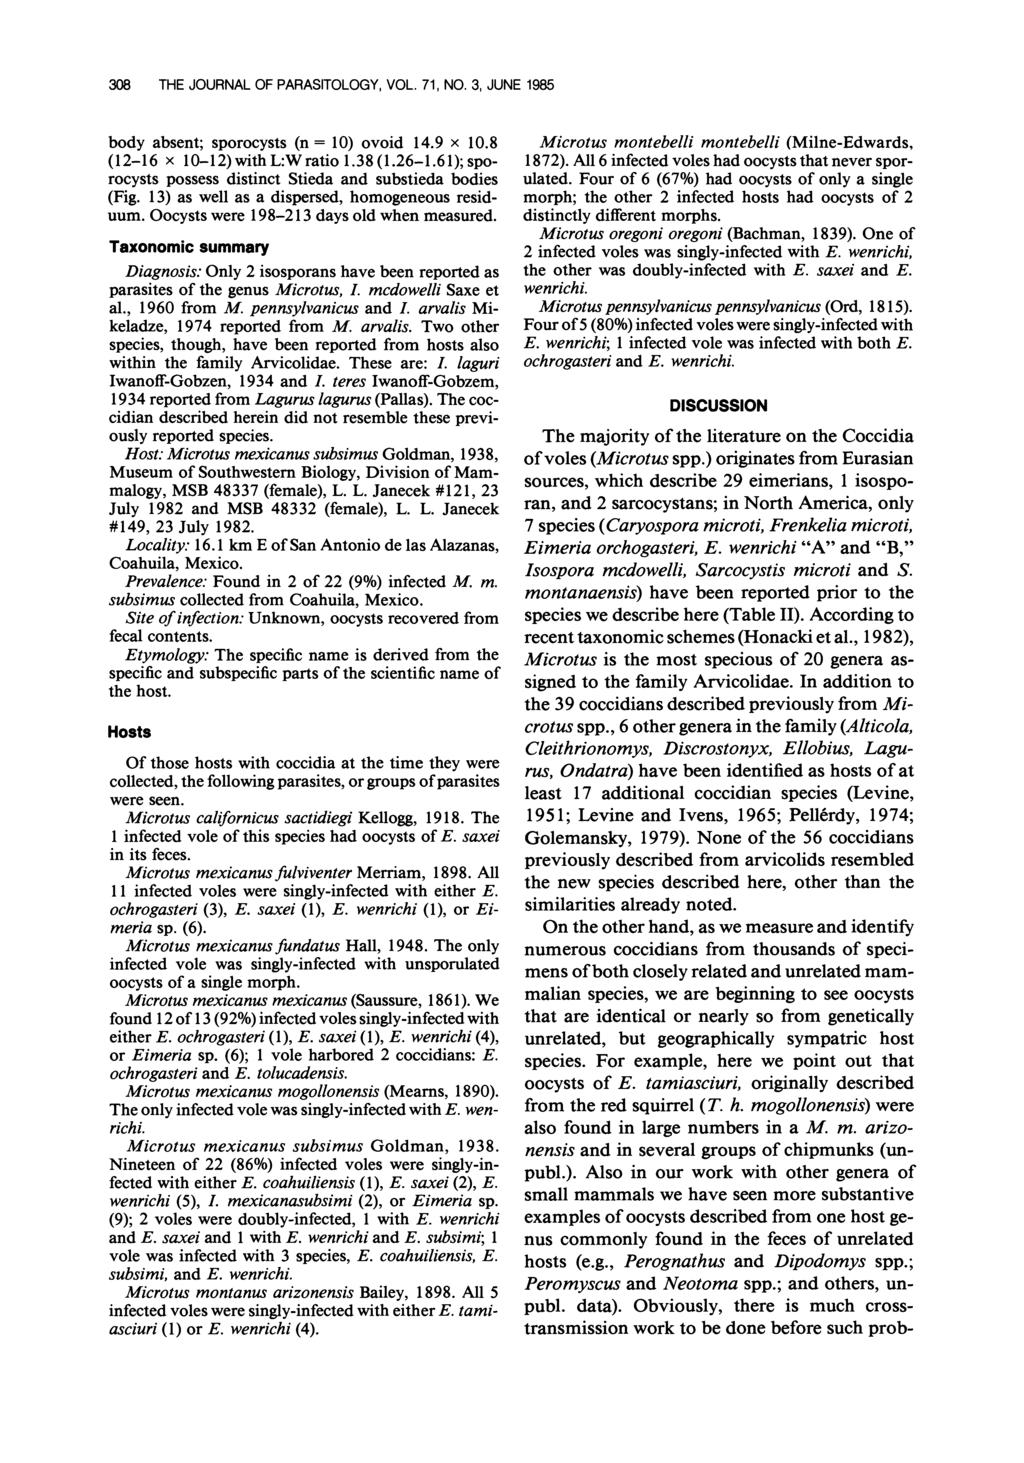 308 THE JOURNAL OF PARASITOLOGY, VOL. 71, NO. 3, JUNE 1985 body absent; sporocysts (n = 10) ovoid 14.9 x 10.8 (12-16 x 10-12)withL:Wratio 1.38 (1.26-1.